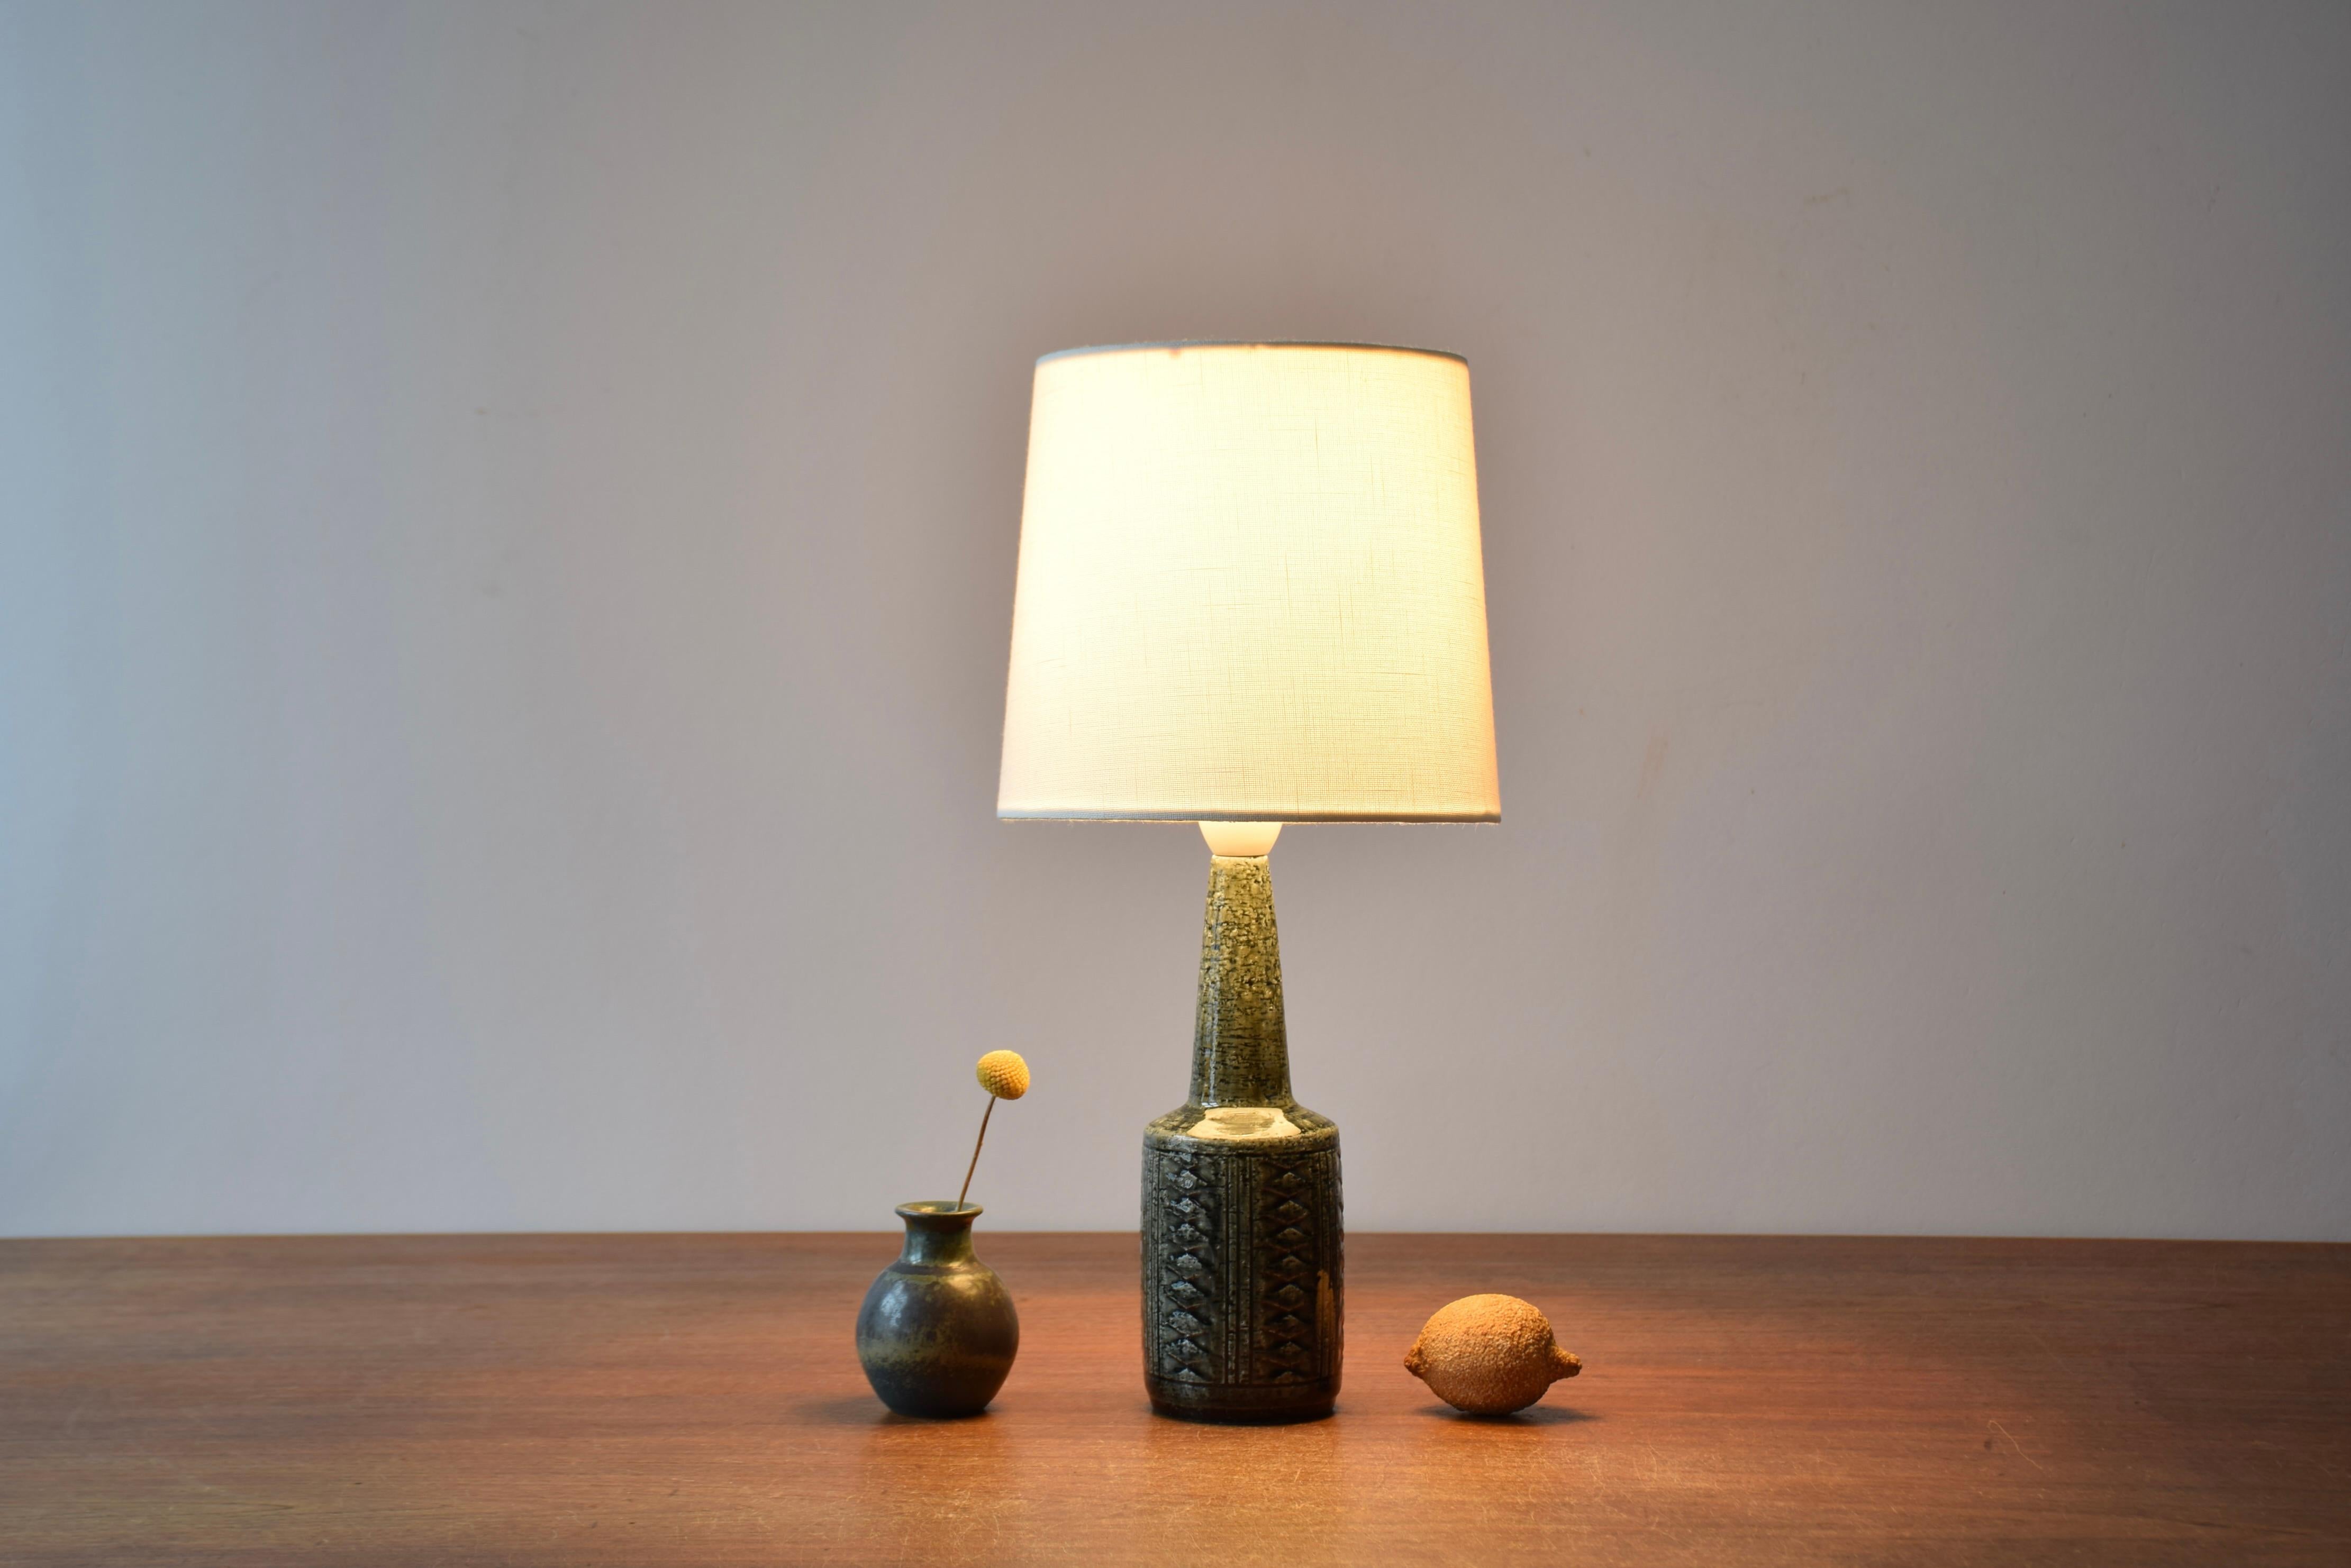 Danish Midcentury small sized table lamp or bed side lamp from Palshus ceramic workshop. 

The lamp was designed by Per Linnemann-Schmidt and made circa 1960s.
It is made with chamotte clay which gives a rough and vivid surface. The glaze is dark